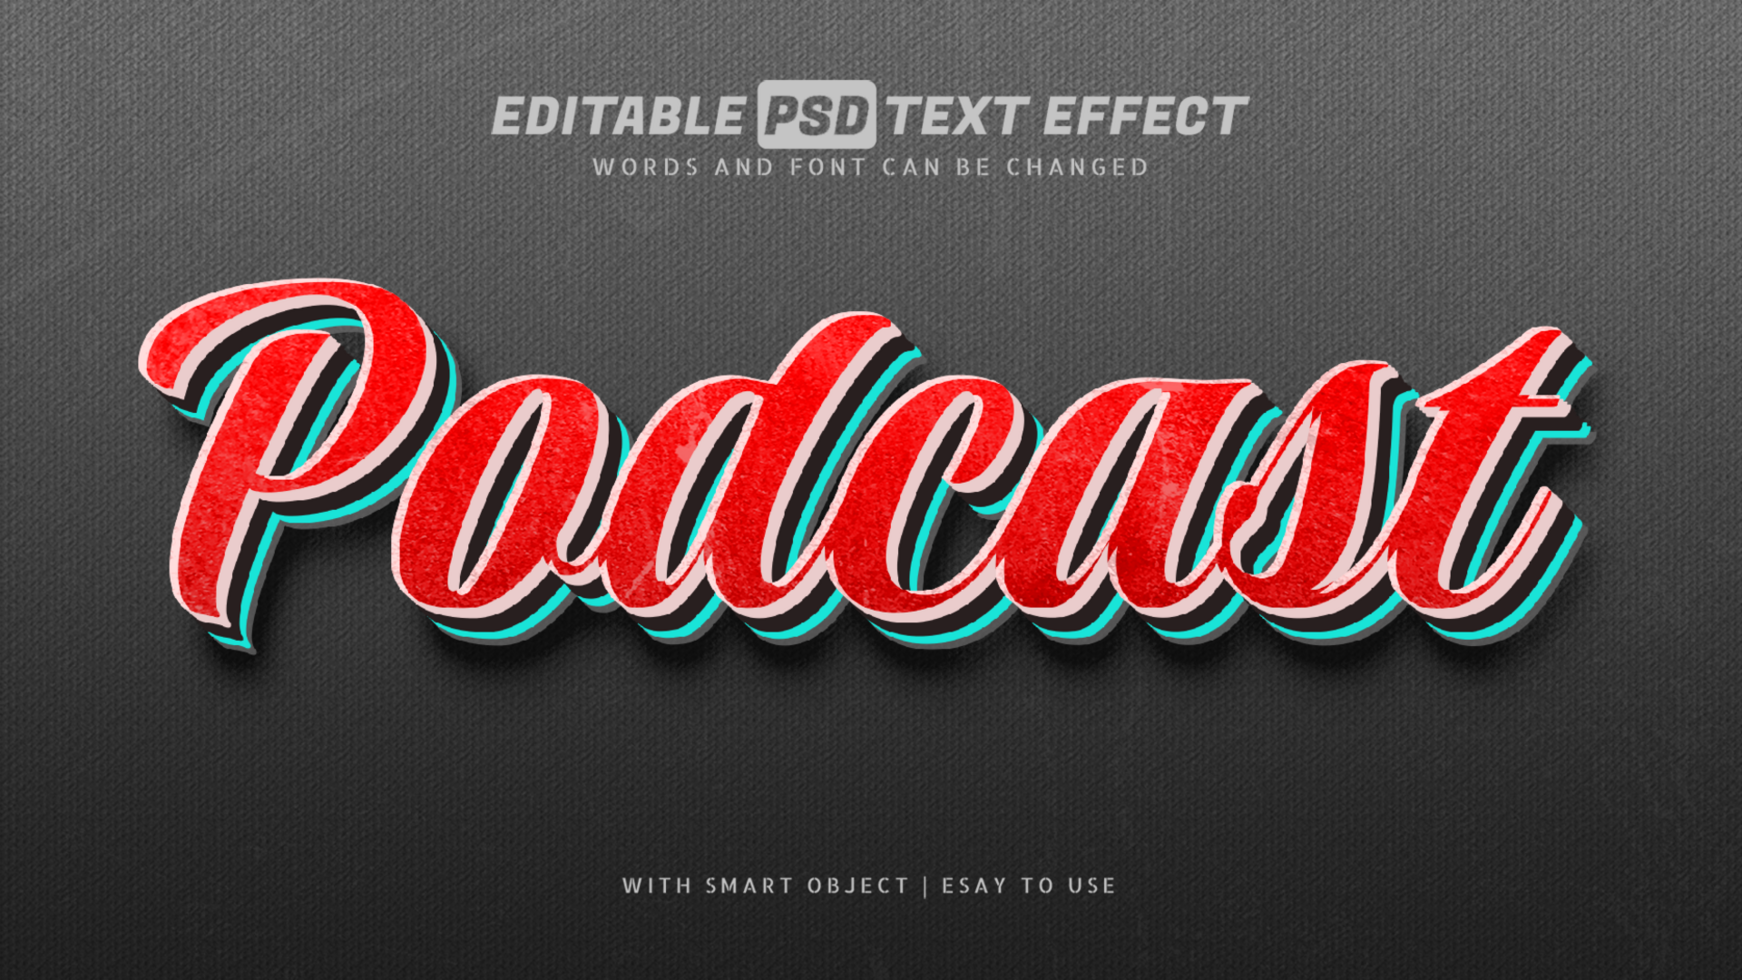 Podcast red 3d text effect editable psd